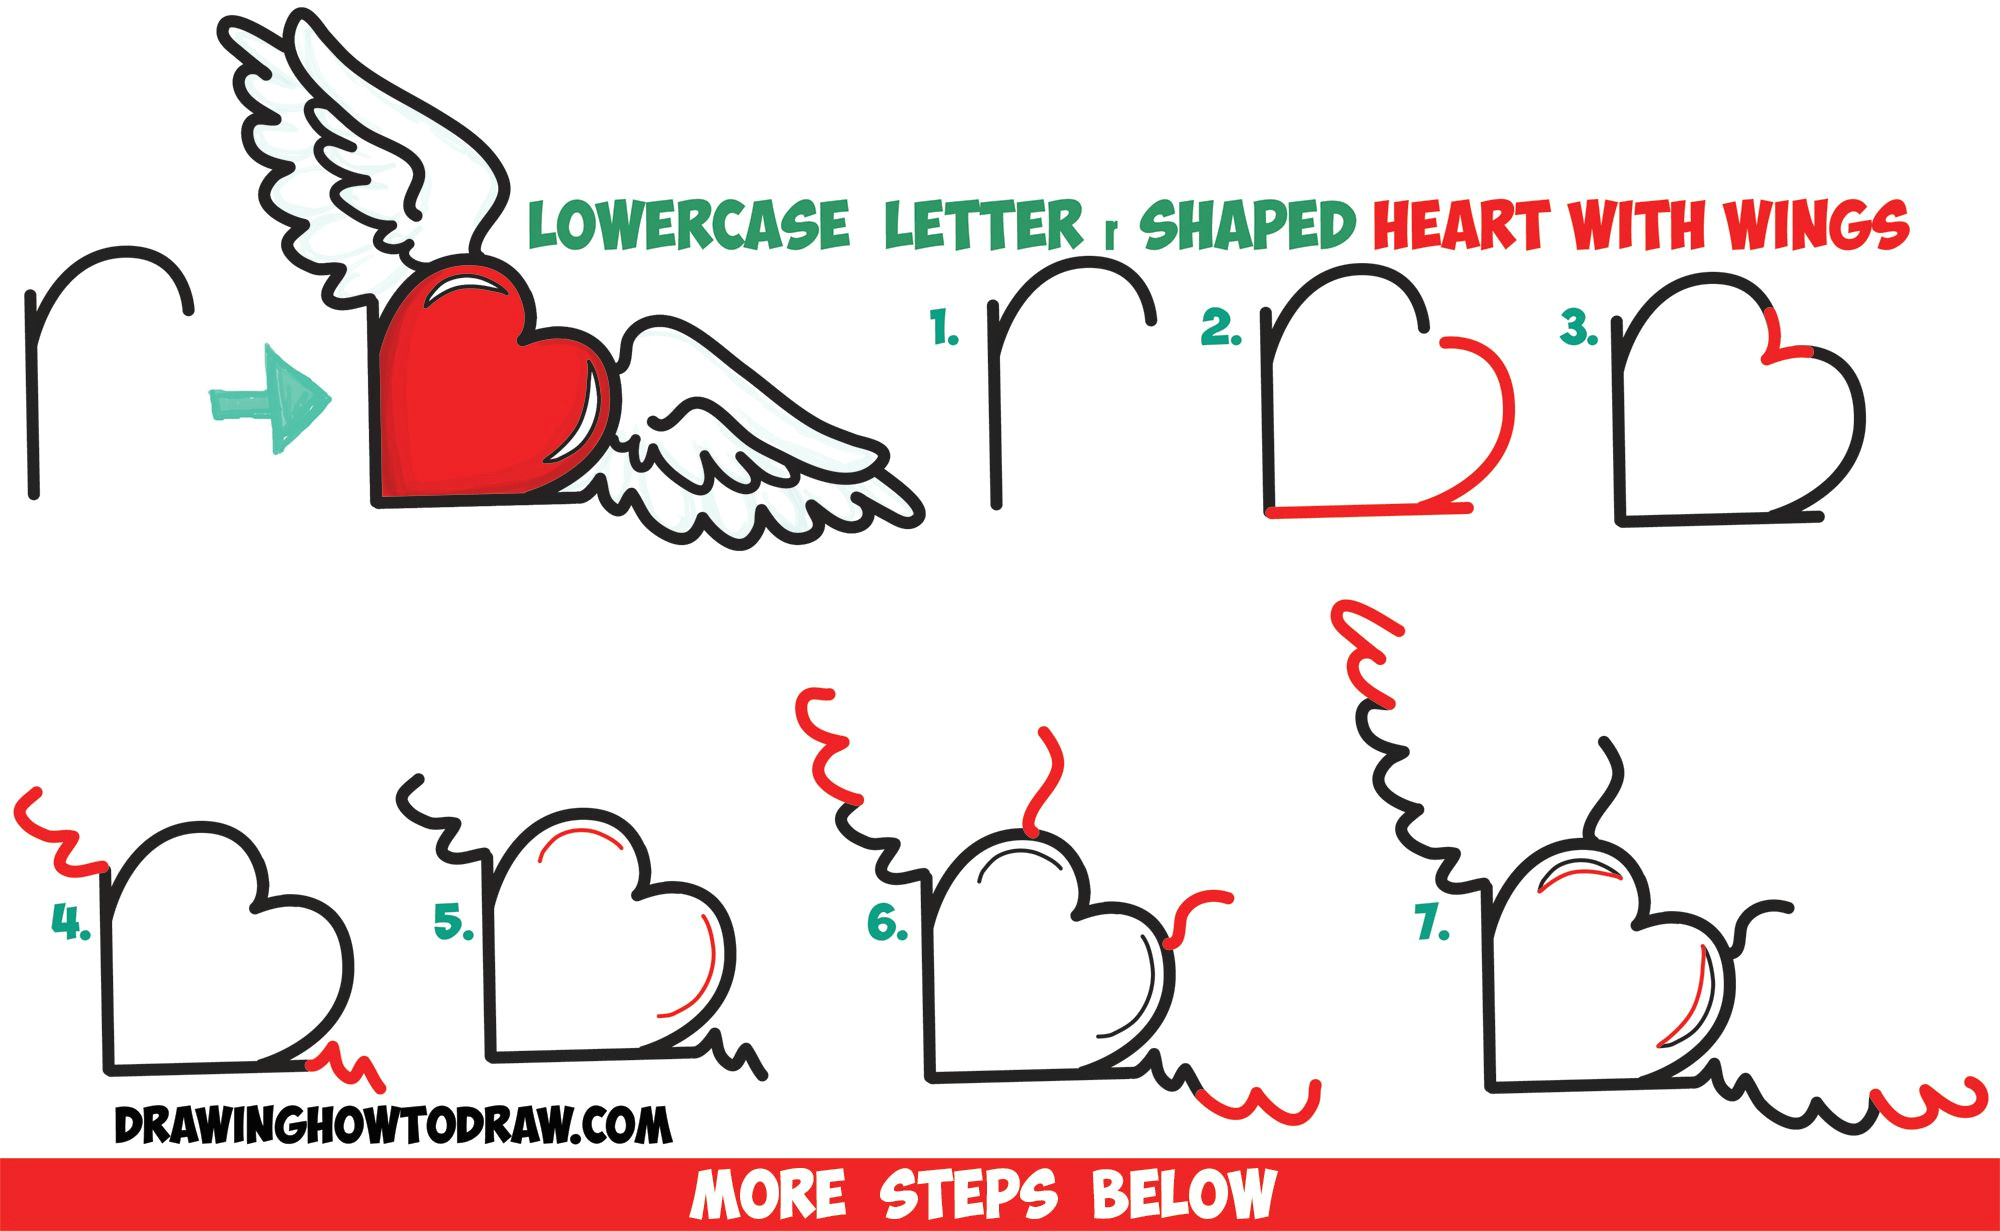 Easy Drawings Letters How to Draw Heart with Wings From Lowercase Letter R Shapes Easy